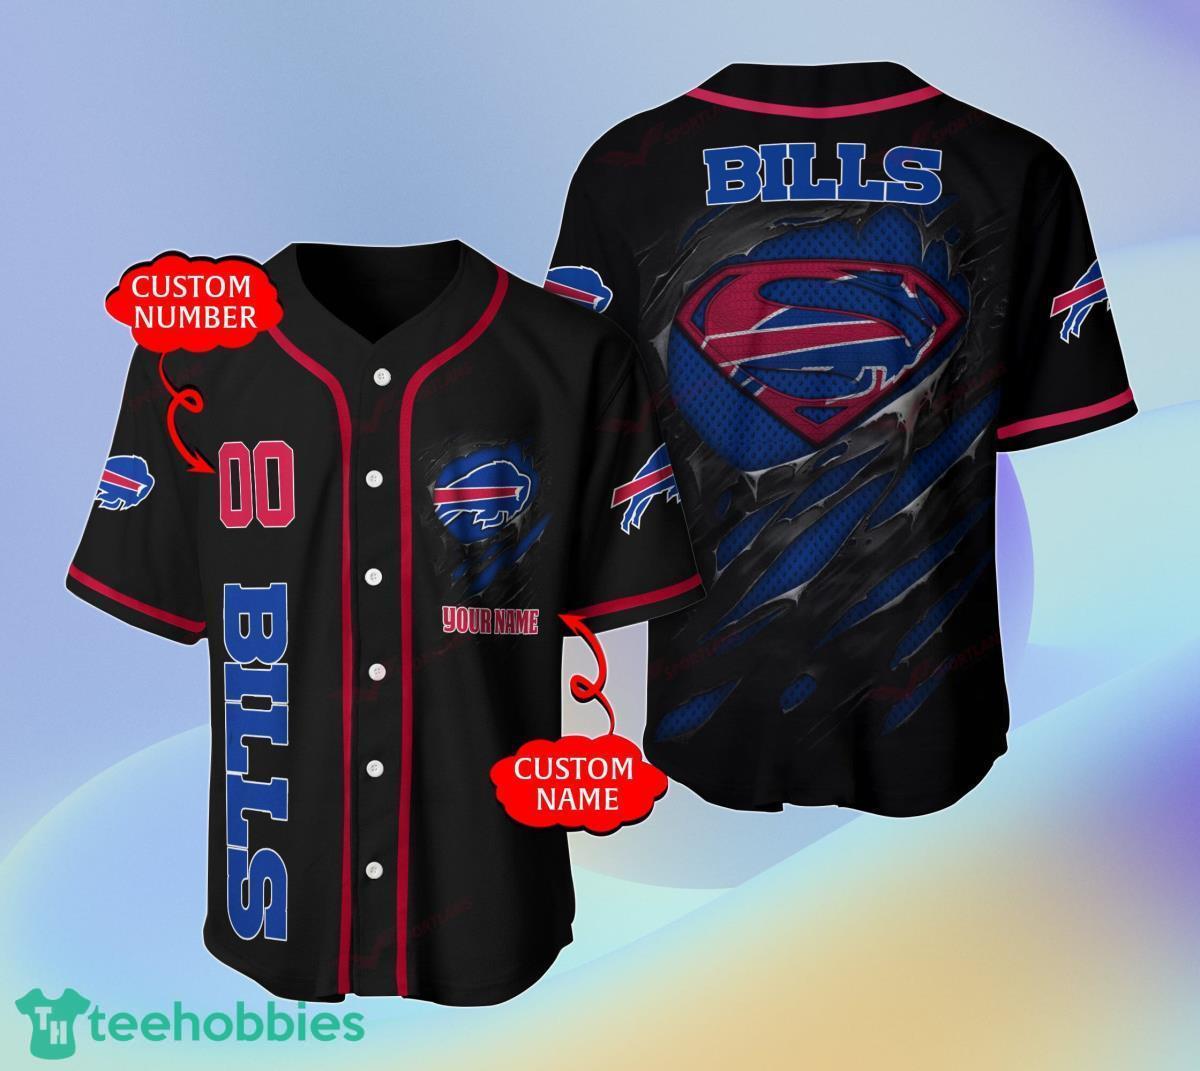 Buffalo Bills-NFL BASEBALL JERSEY CUSTOM NAME AND NUMBER Special Gift For  Men And Women FansSpecial Gift For Men And Women Fans